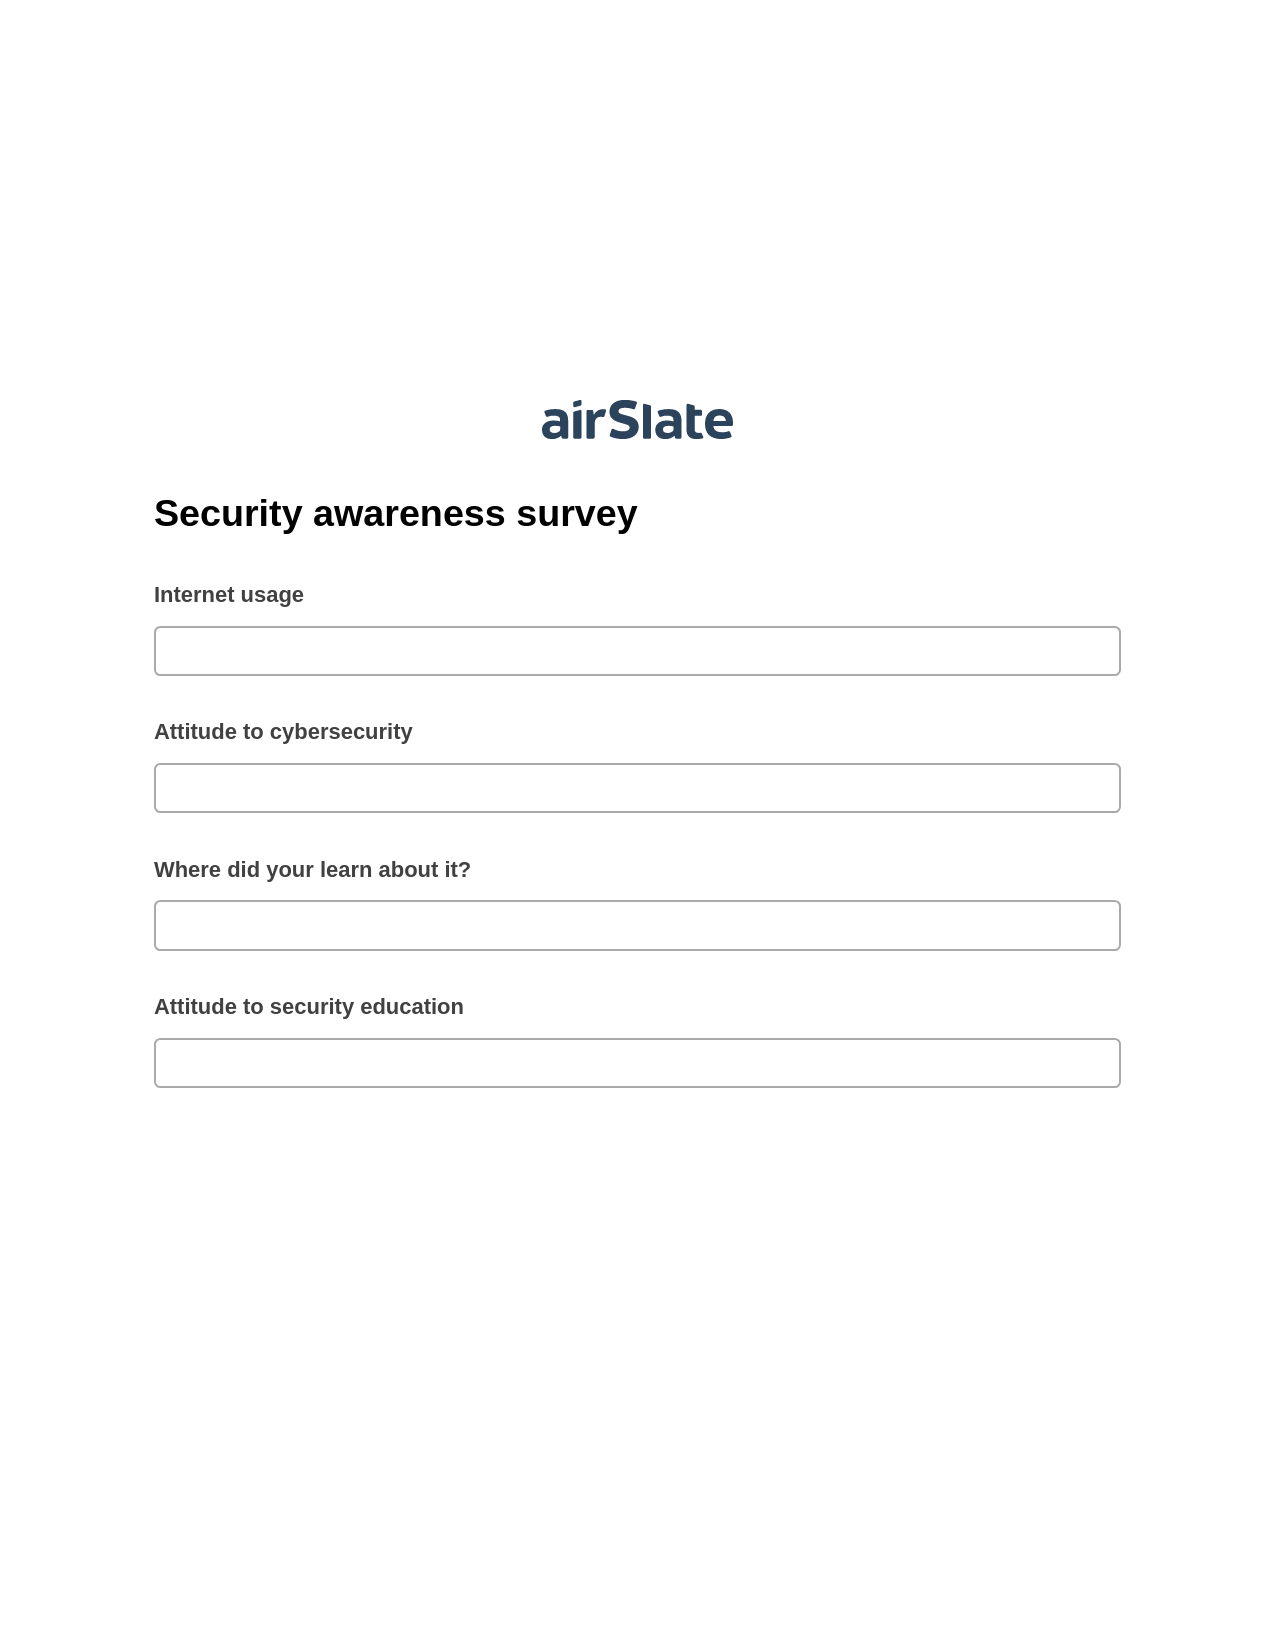 Security awareness survey Pre-fill Document Bot, Lock the slate bot, Export to Excel 365 Bot